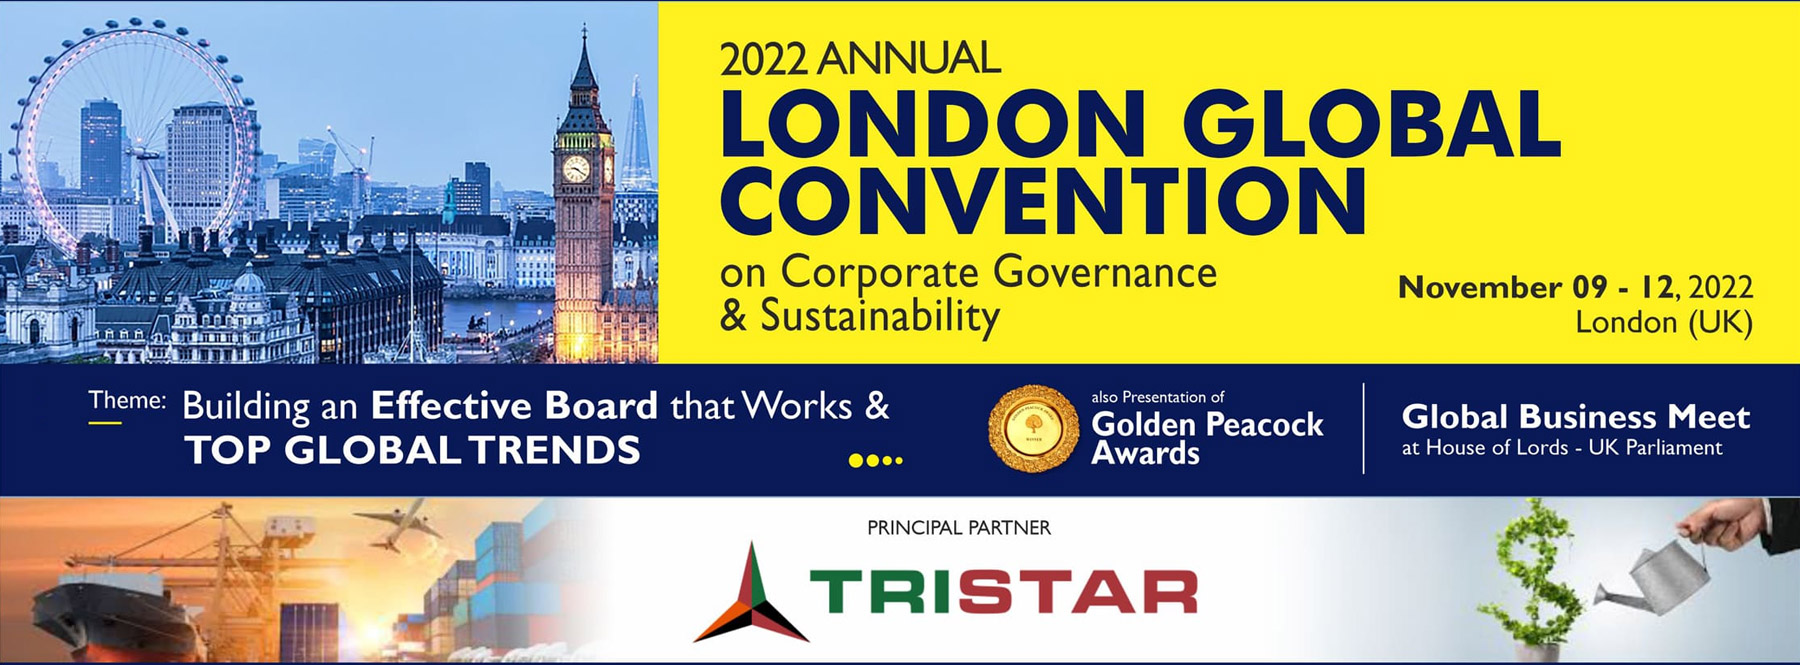 London Global Convention 2022